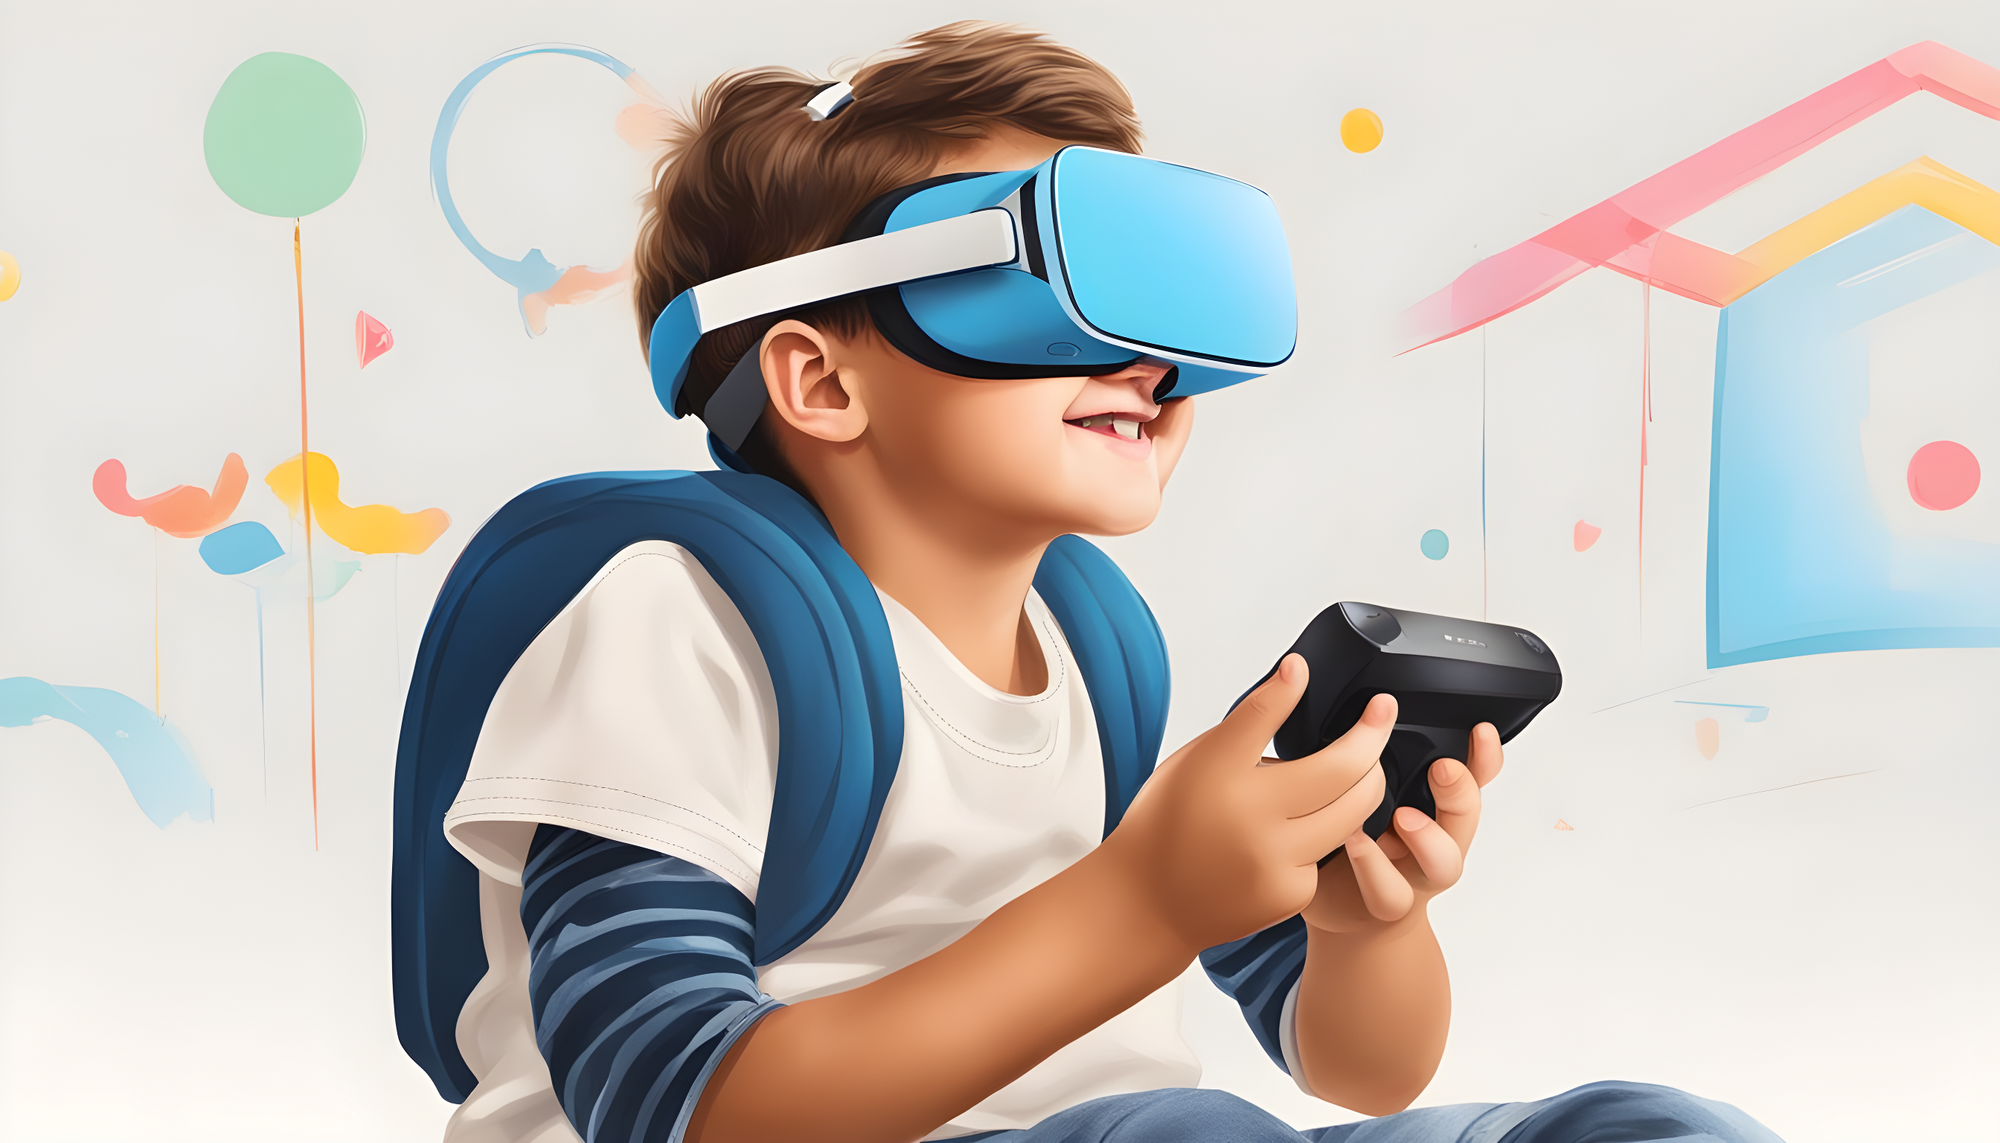 VR and AR: Transforming Education into a Fun and Immersive Experience